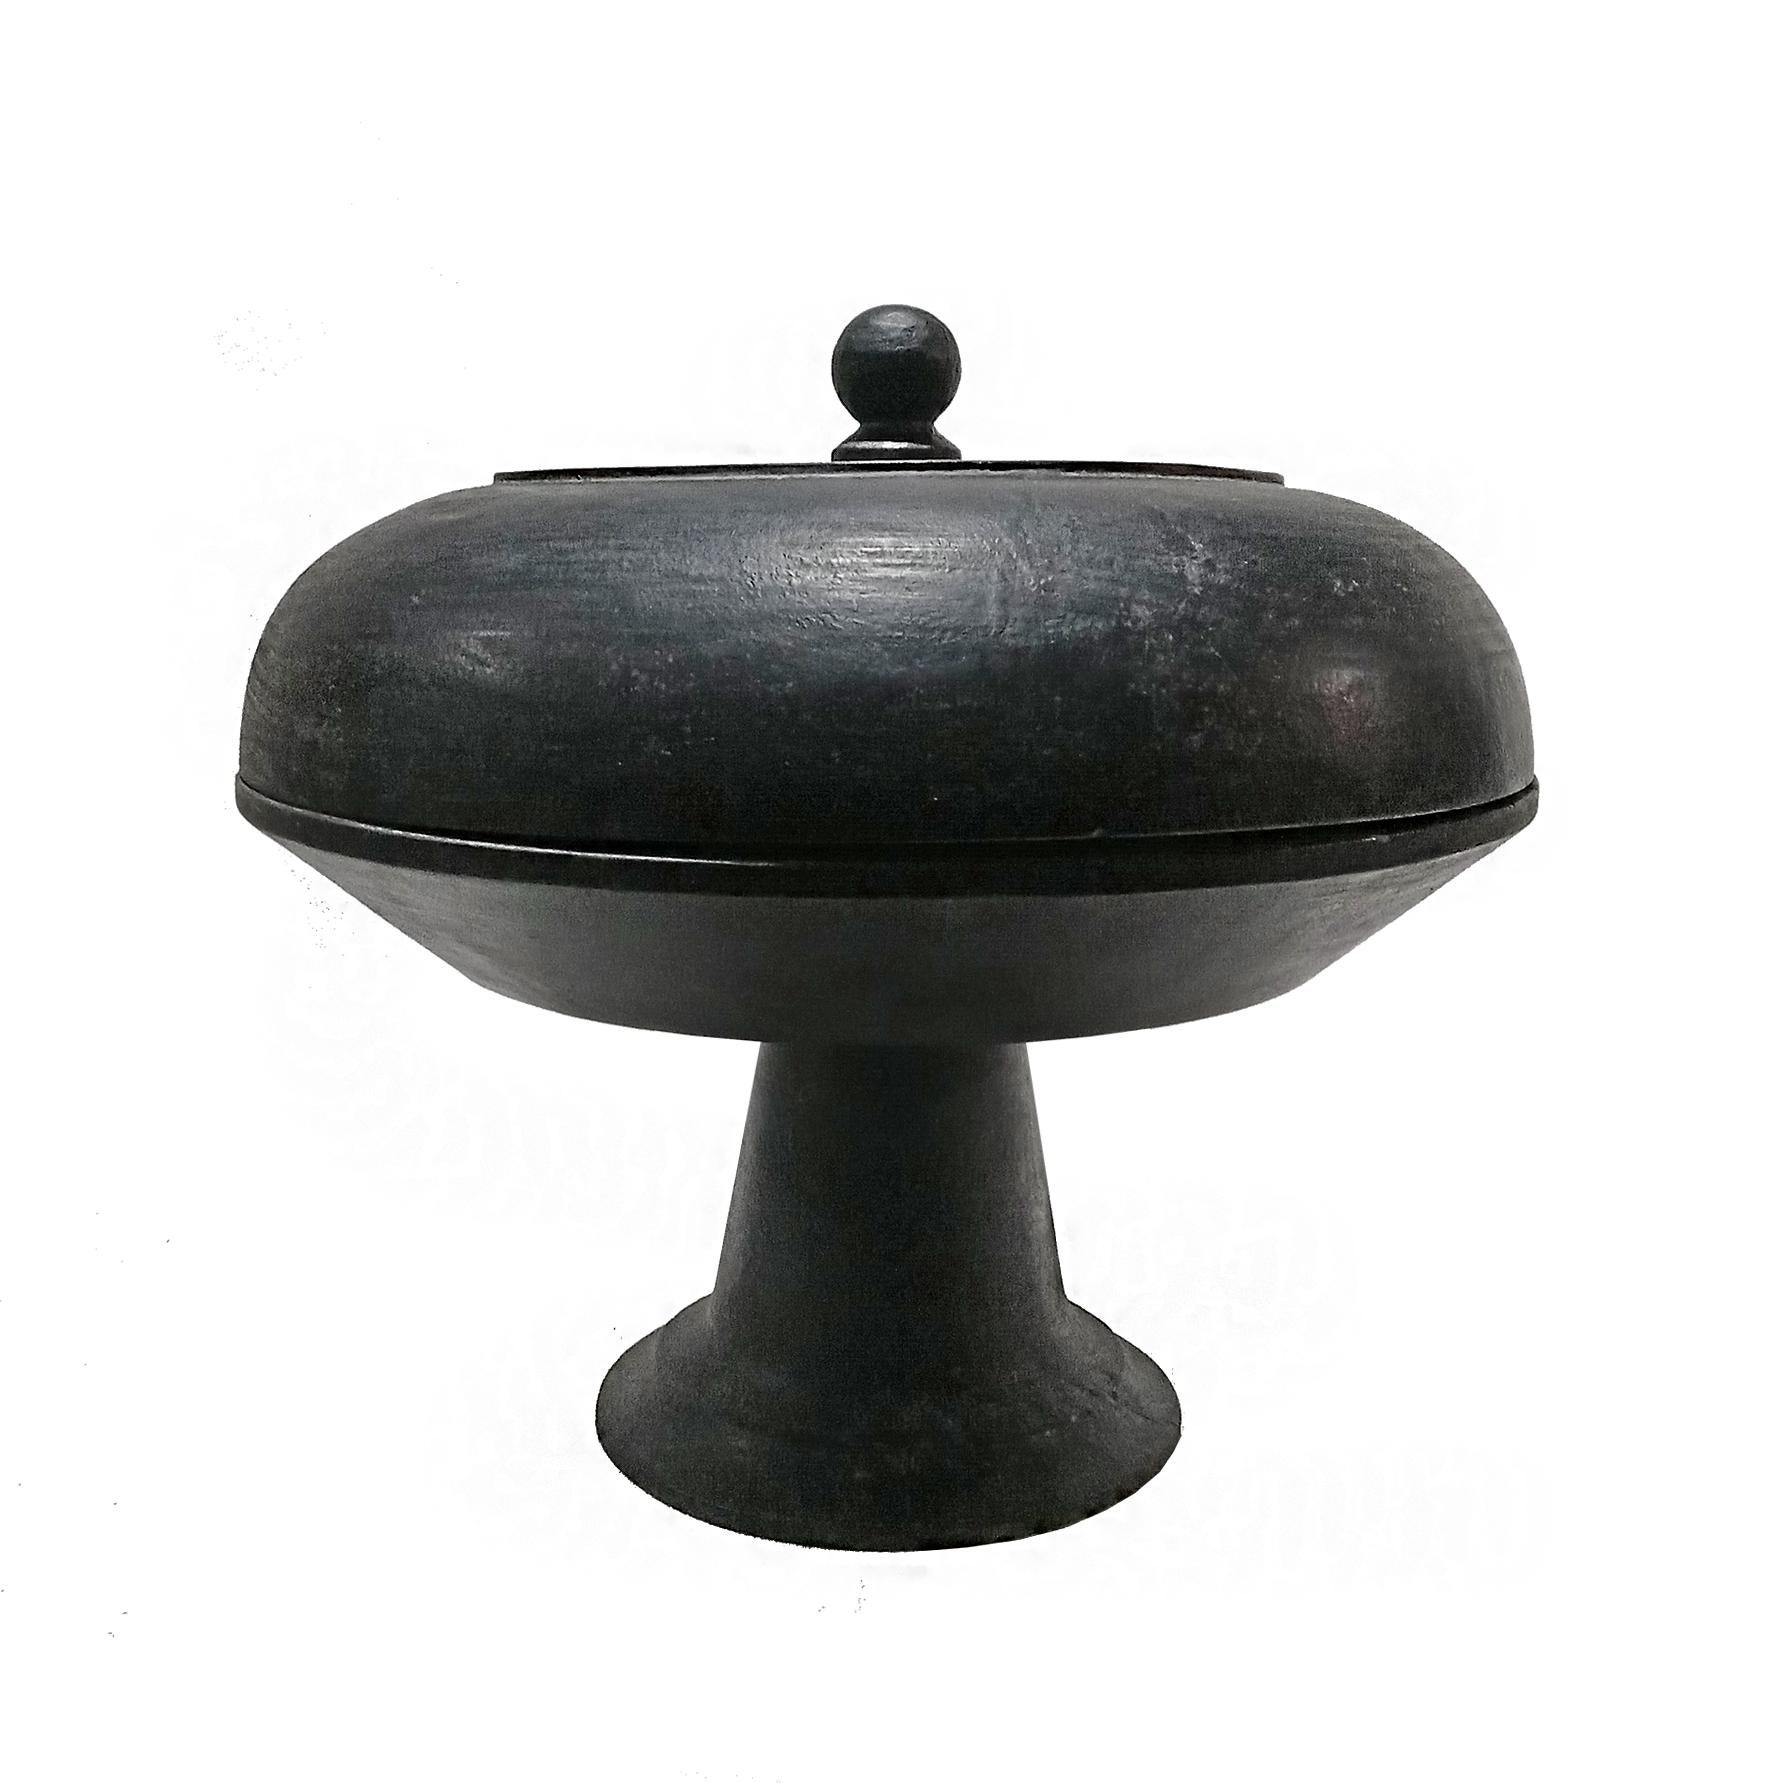 A circular pedestal serving tray with lid from Indonesia, late 20th Century. 

Hand-carved by local artisans out of a single piece of Jackfruit wood and finished in beautiful satin black stain, with a precisely fitting lid and a turned pedestal